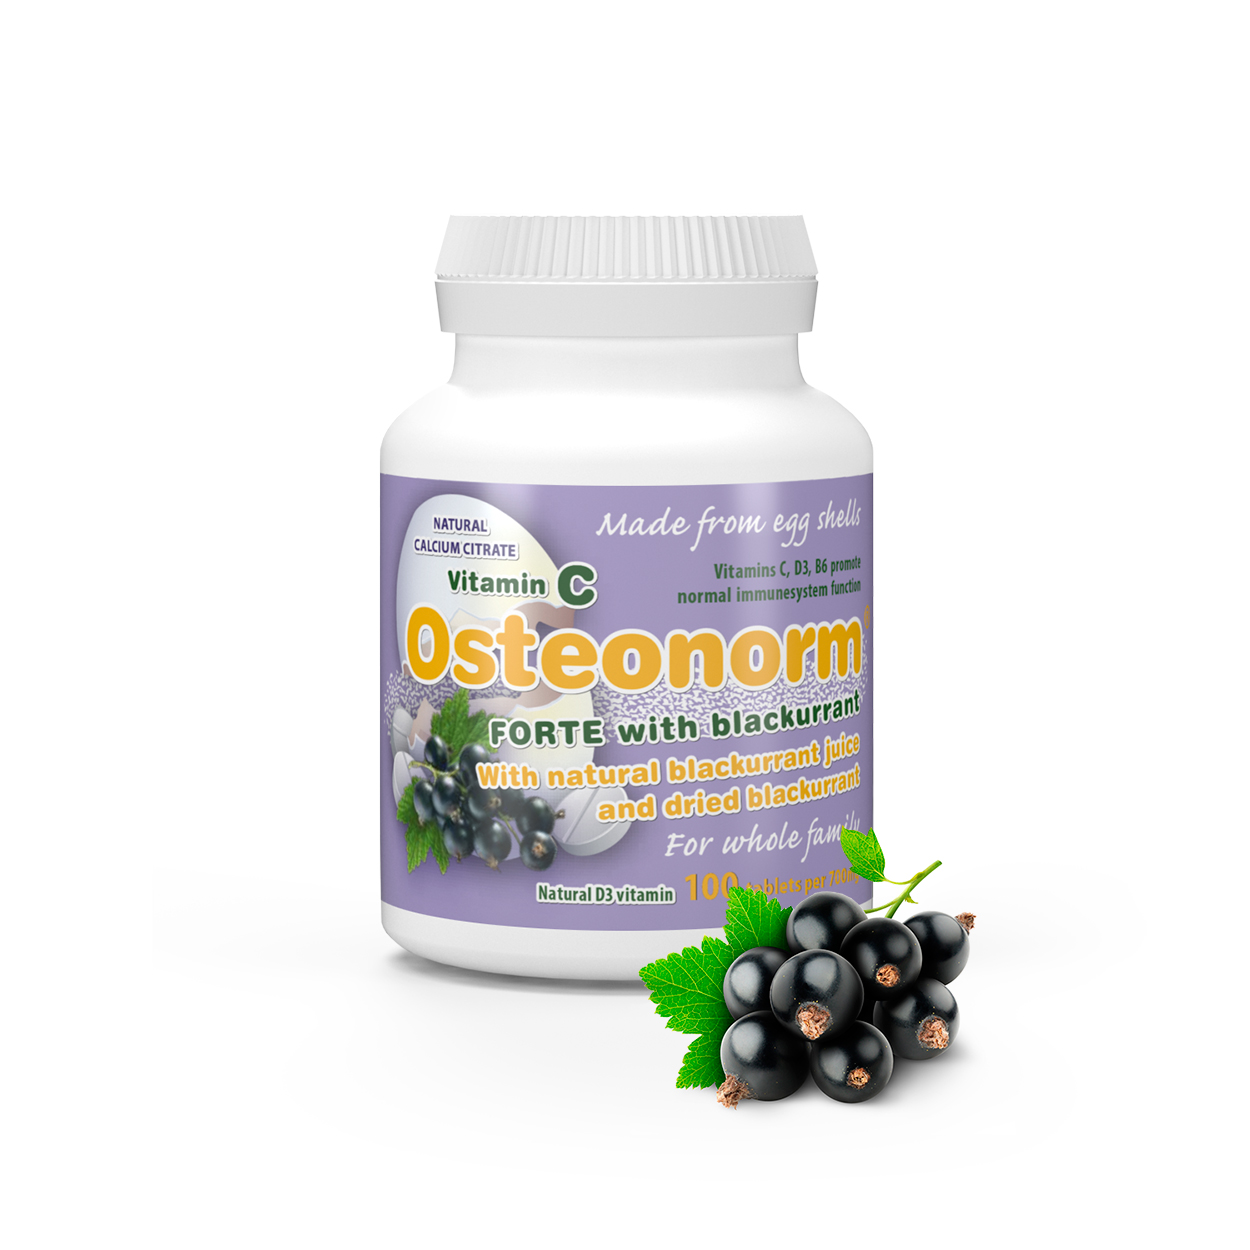 Osteonorm_Blackcurrant_02 Osteonorm FORTE with Blackcurrant 100 tablets per 700mg